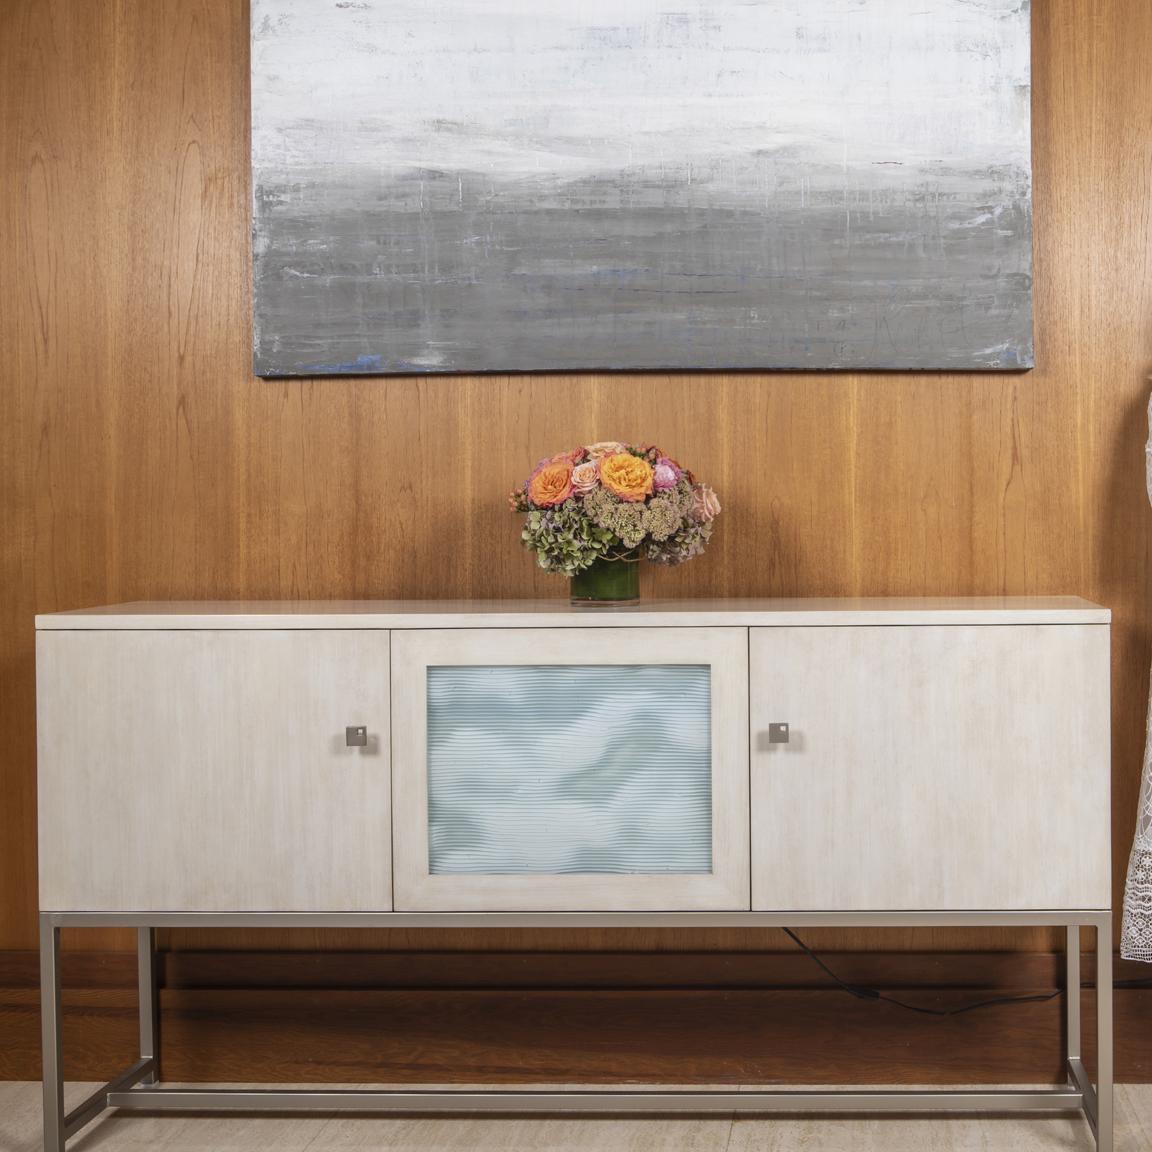 Exquisitely crafted, the Leah Cabinet will effortlessly complement any modern elegant interior space. Designed for entry spaces with an inspired mid-century look the Leah cabinet optimizes space, beauty, and light. Complete with white wave glass and